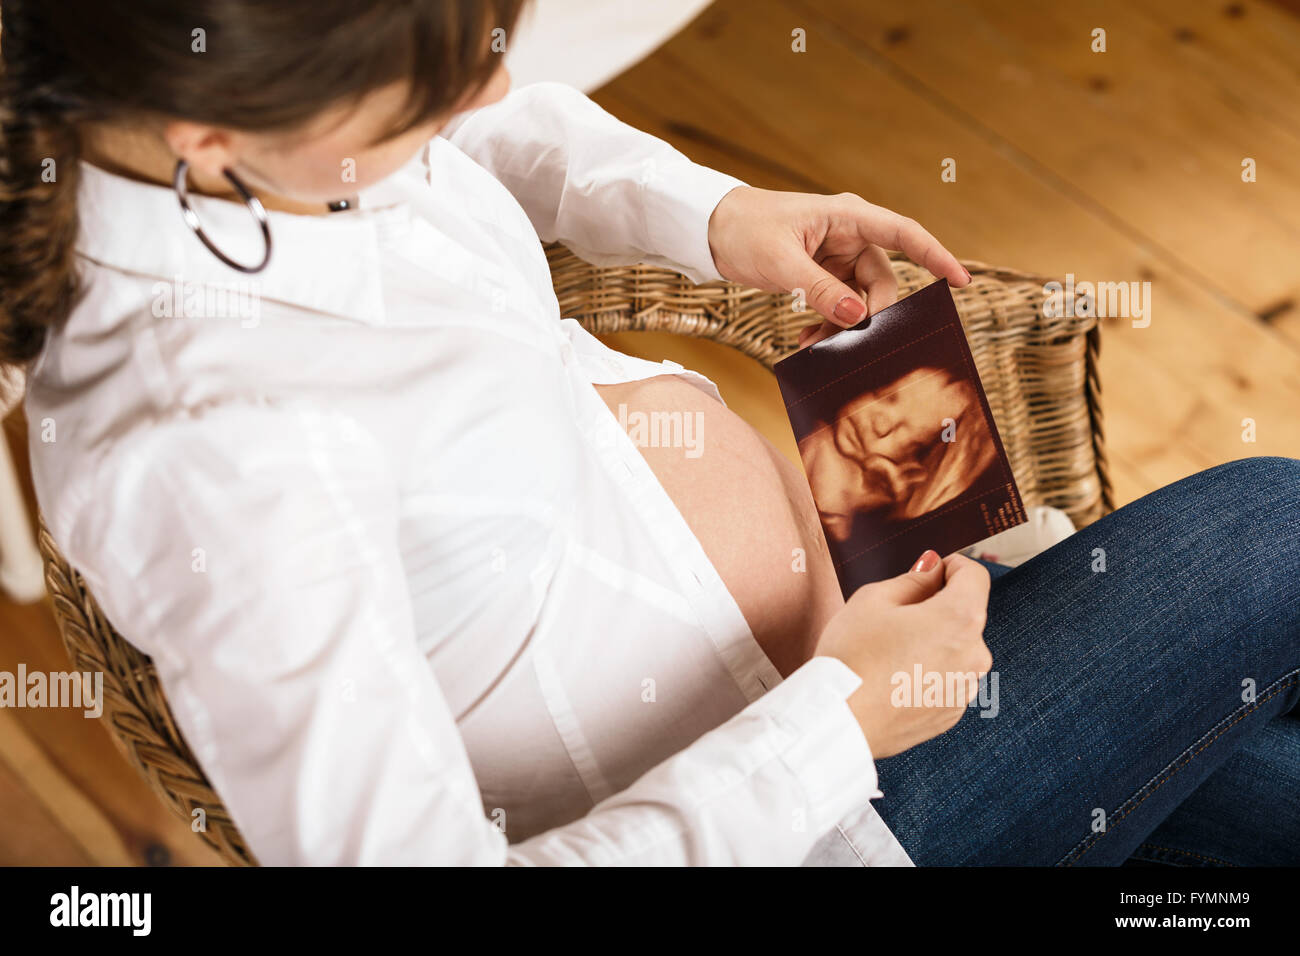 Young pregnant woman expecting baby Stock Photo